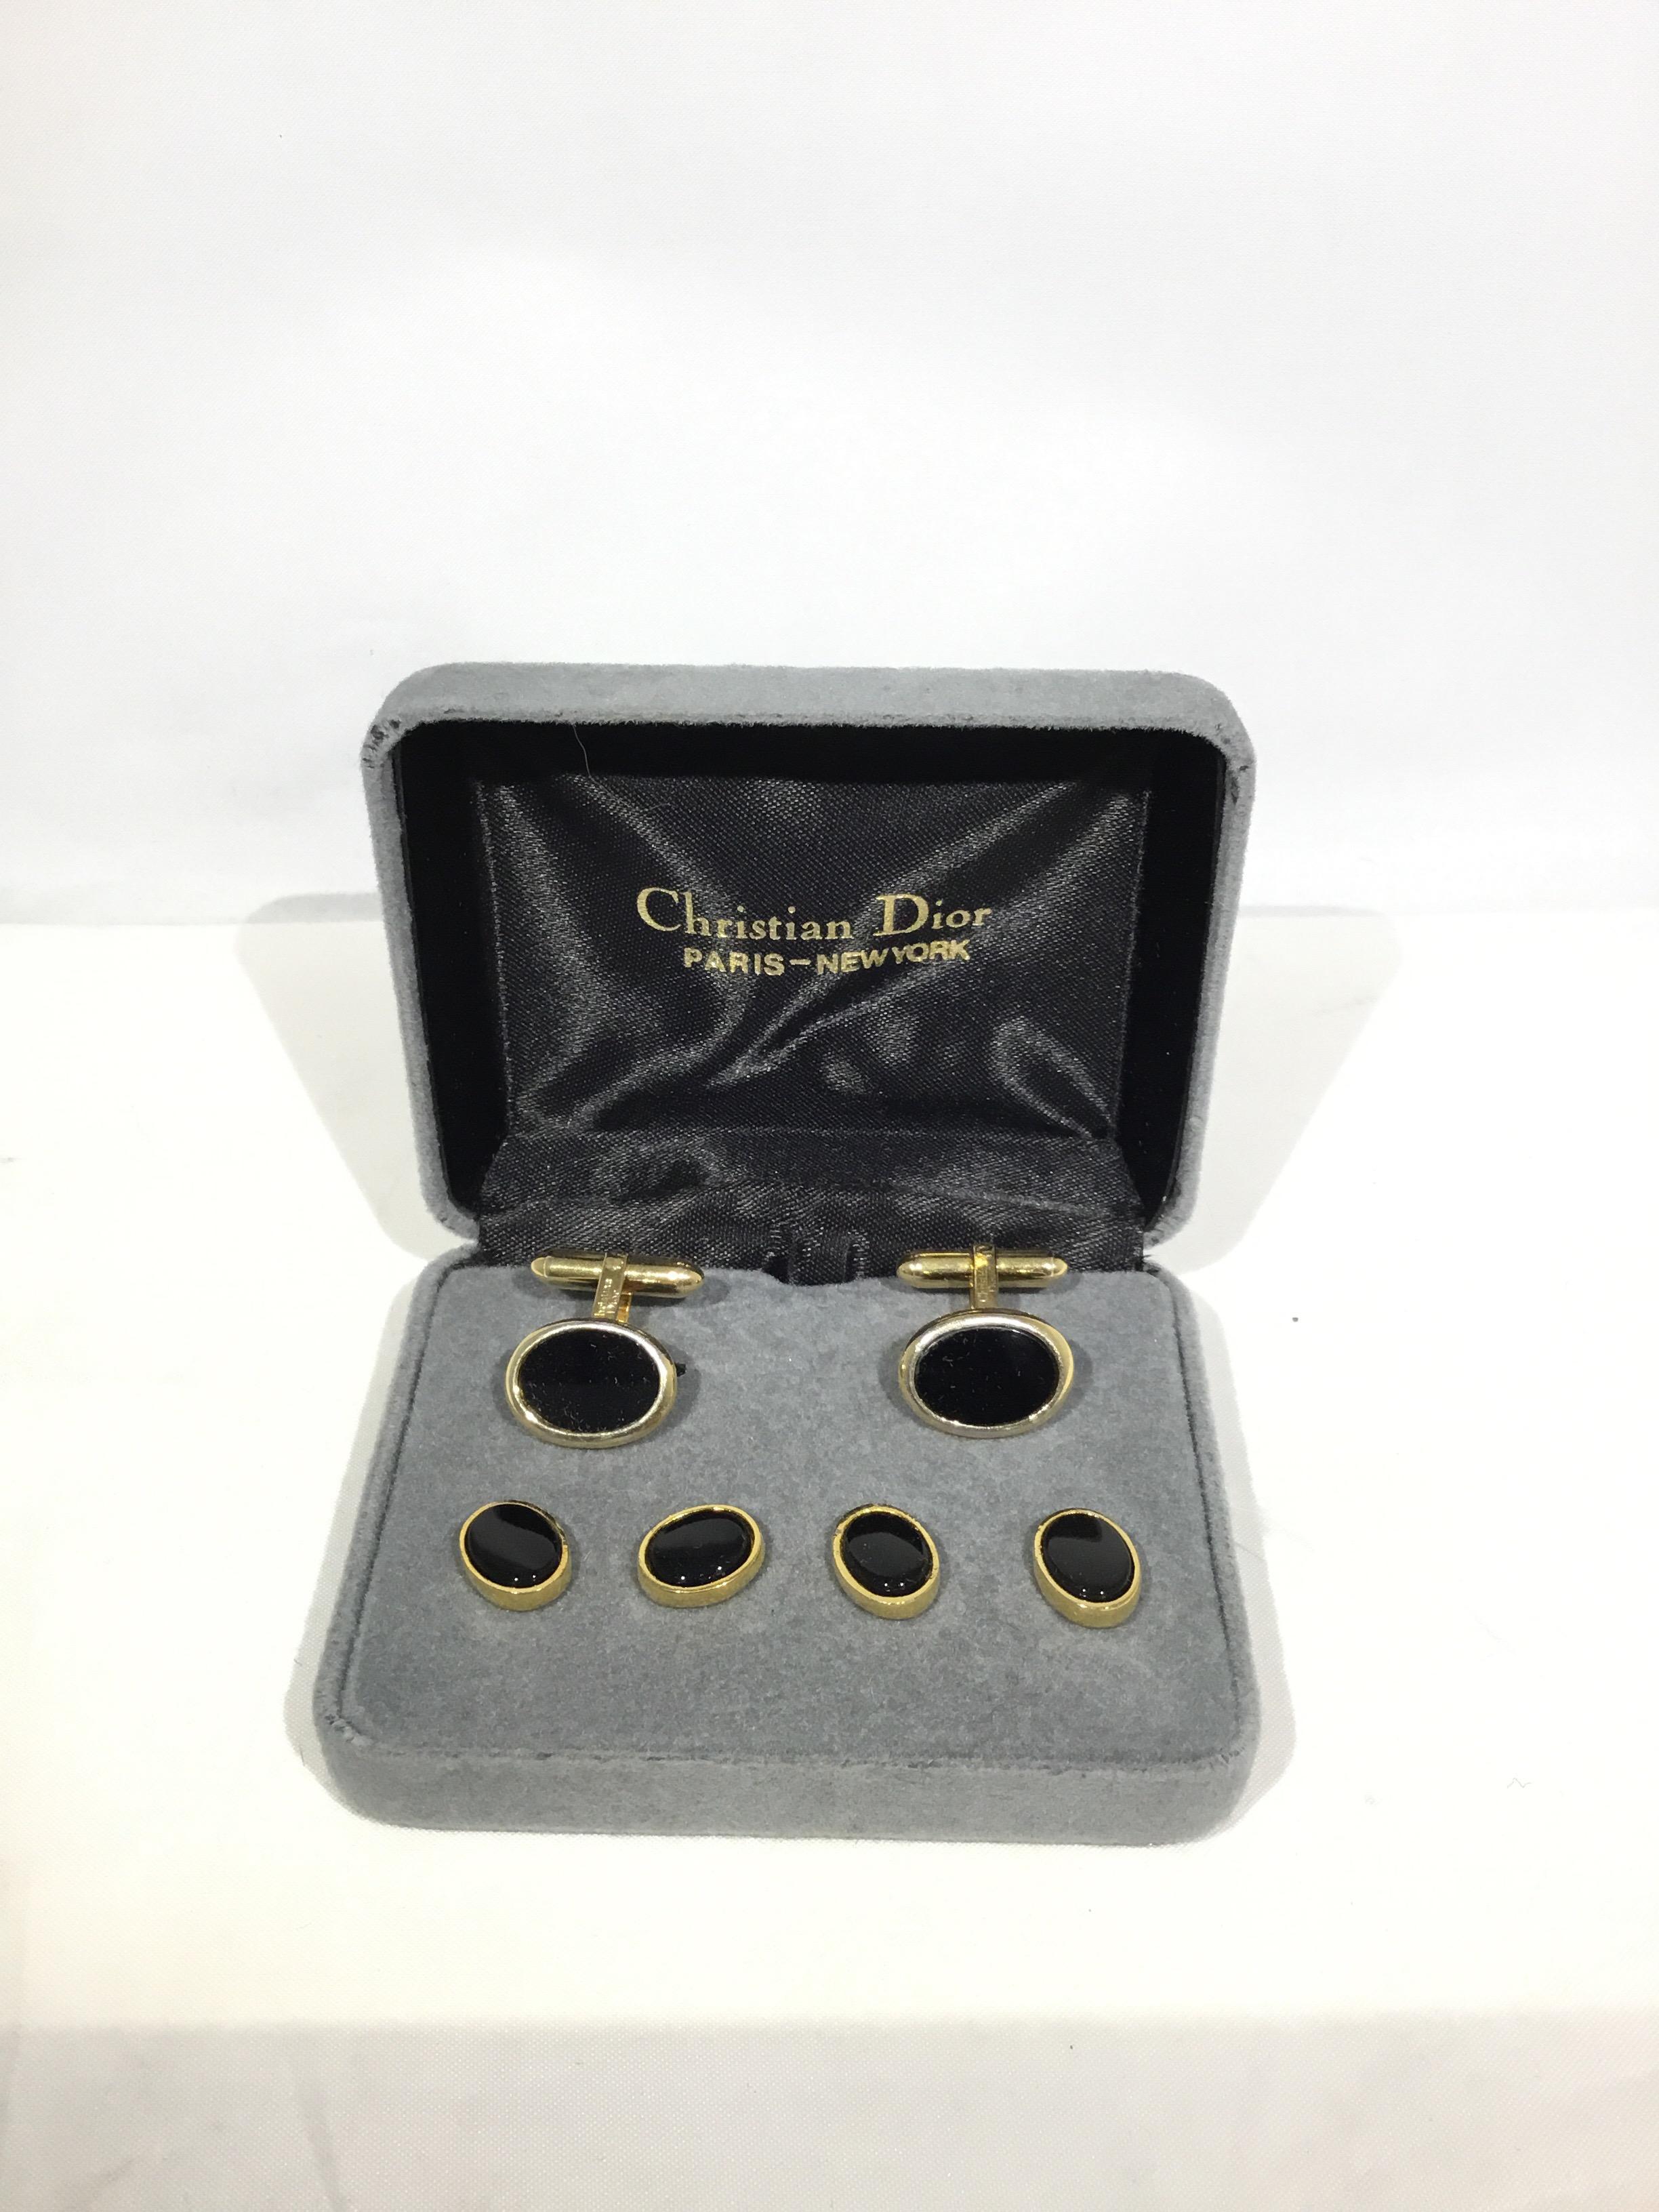 Vintage Christian Dior 1970’s cufflinks in goldtone metal and black center. Original box is included with 6 cufflinks total. Excellent condition.